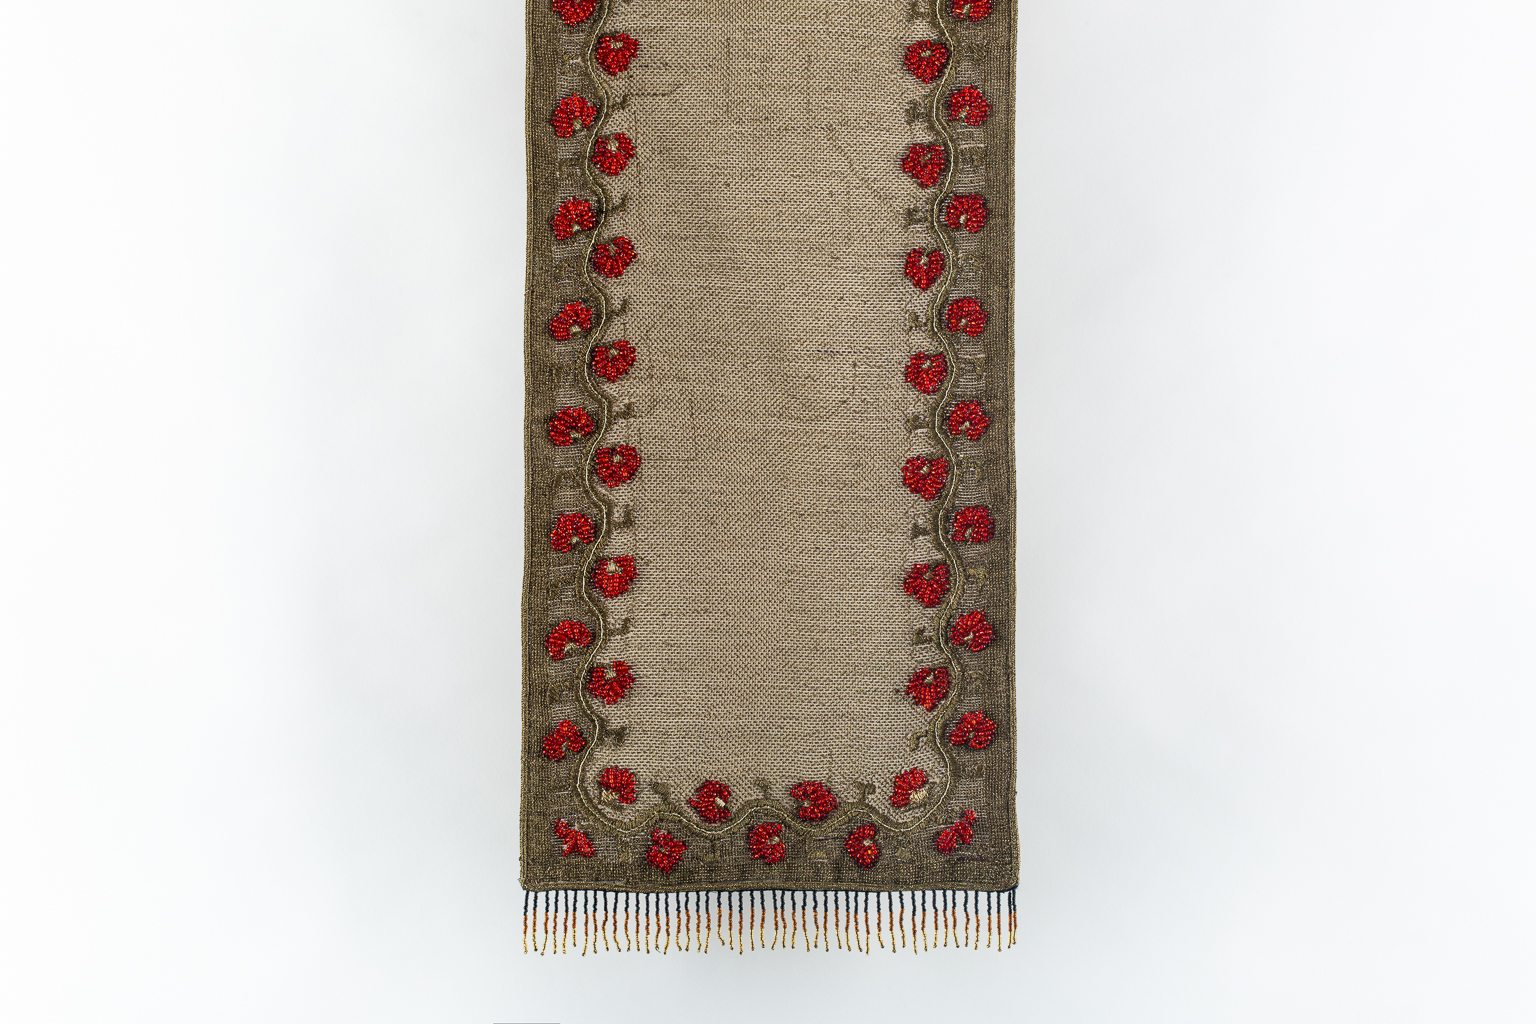 Hand-crafted runner with red embroidered flowers